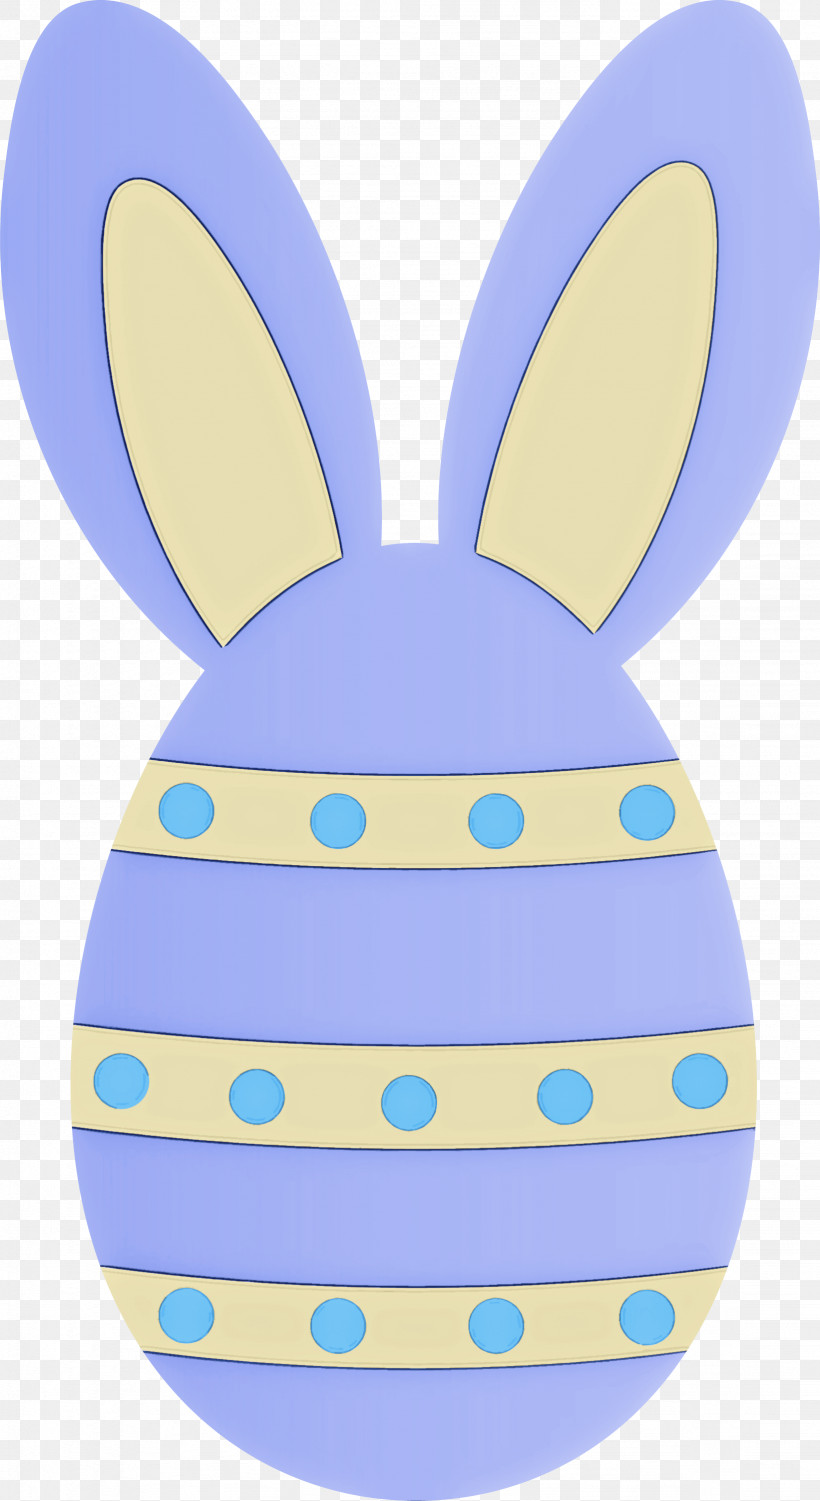 Easter Egg With Bunny Ears, PNG, 1638x3000px, Easter Egg With Bunny Ears, Easter Bunny, Rabbit, Rabbits And Hares Download Free